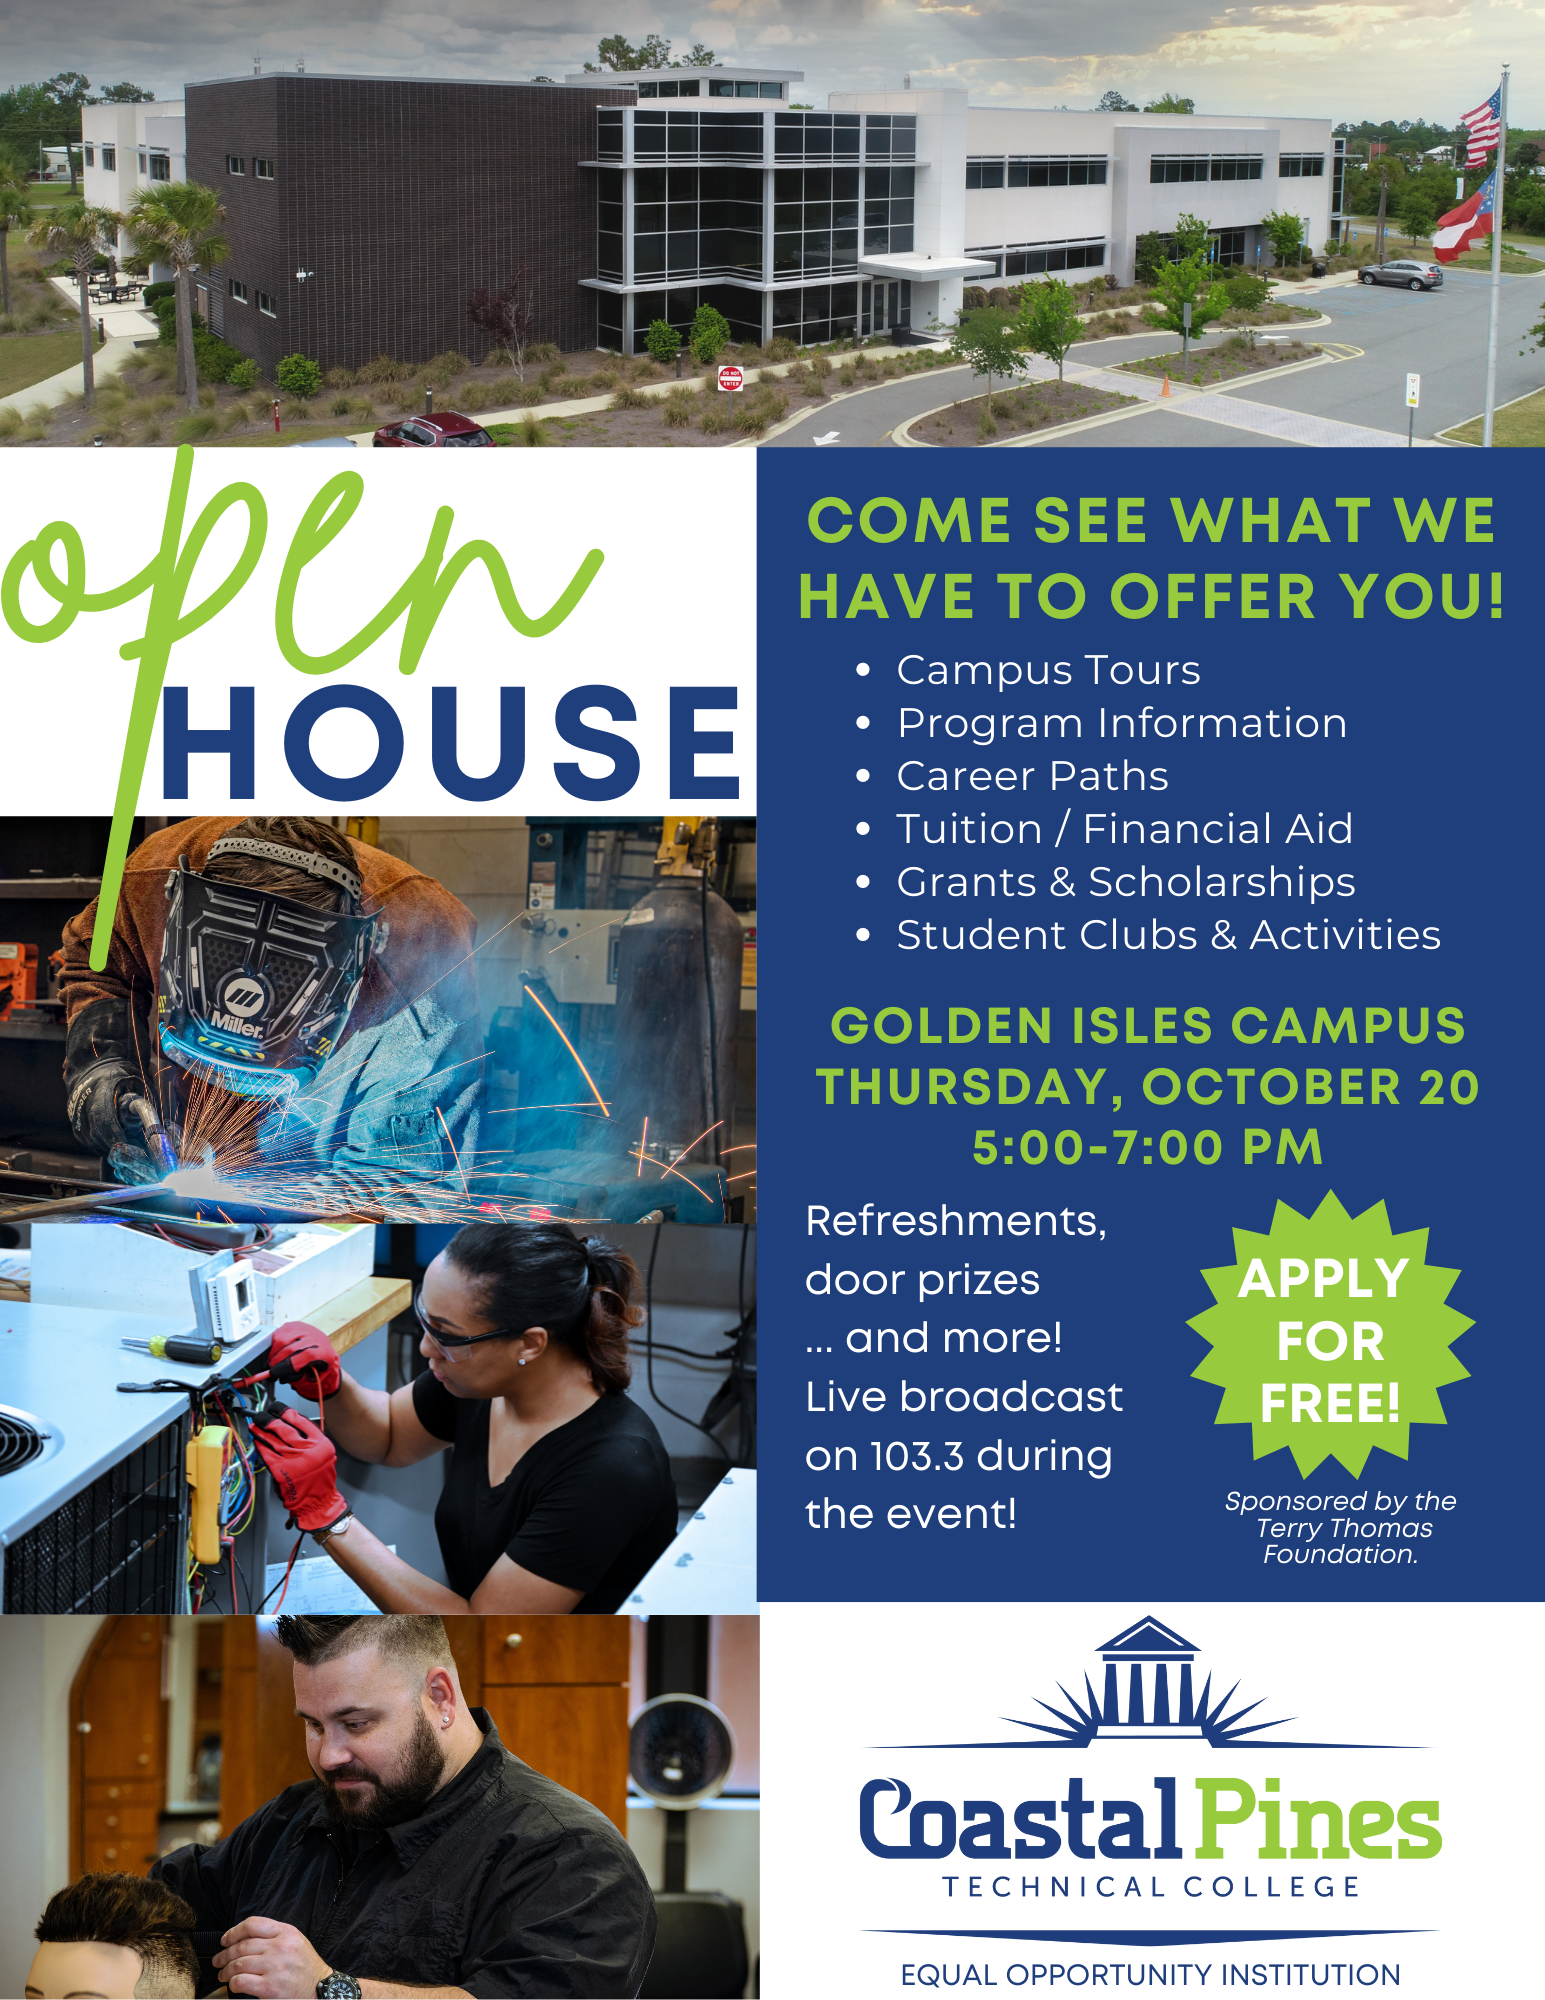 Photo for Coastal Pines Technical College to Host Open House on Golden Isles Campus